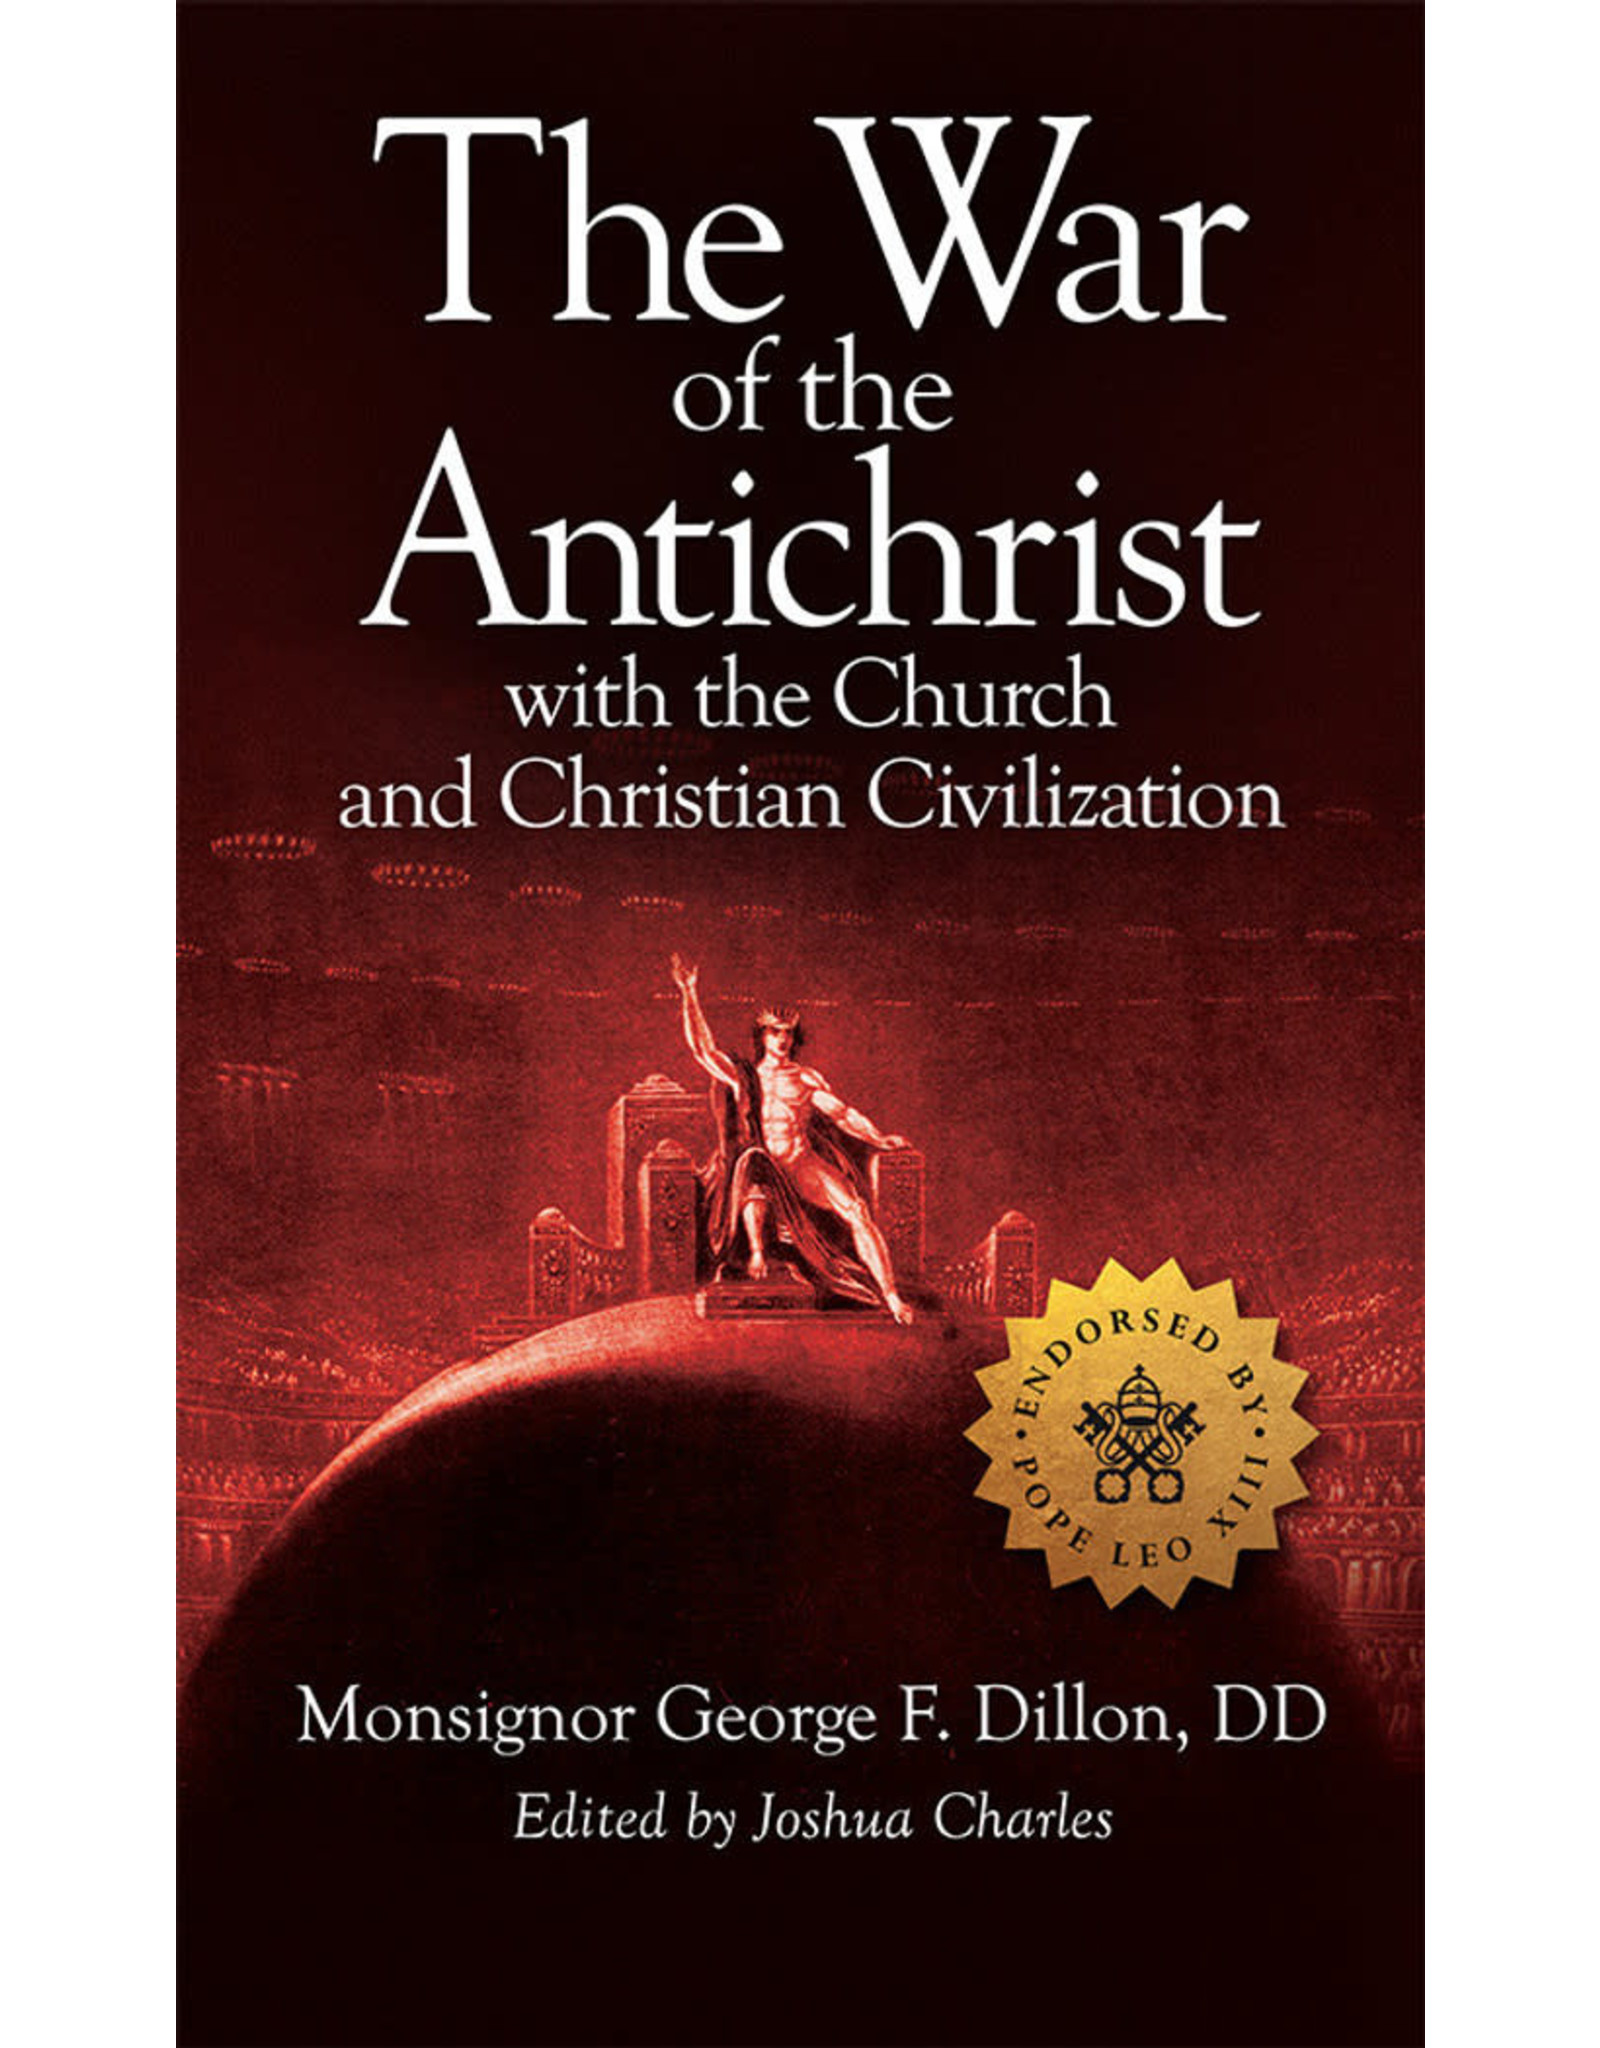 Tan The War of the Antichrist with the Church and Christian Civilization